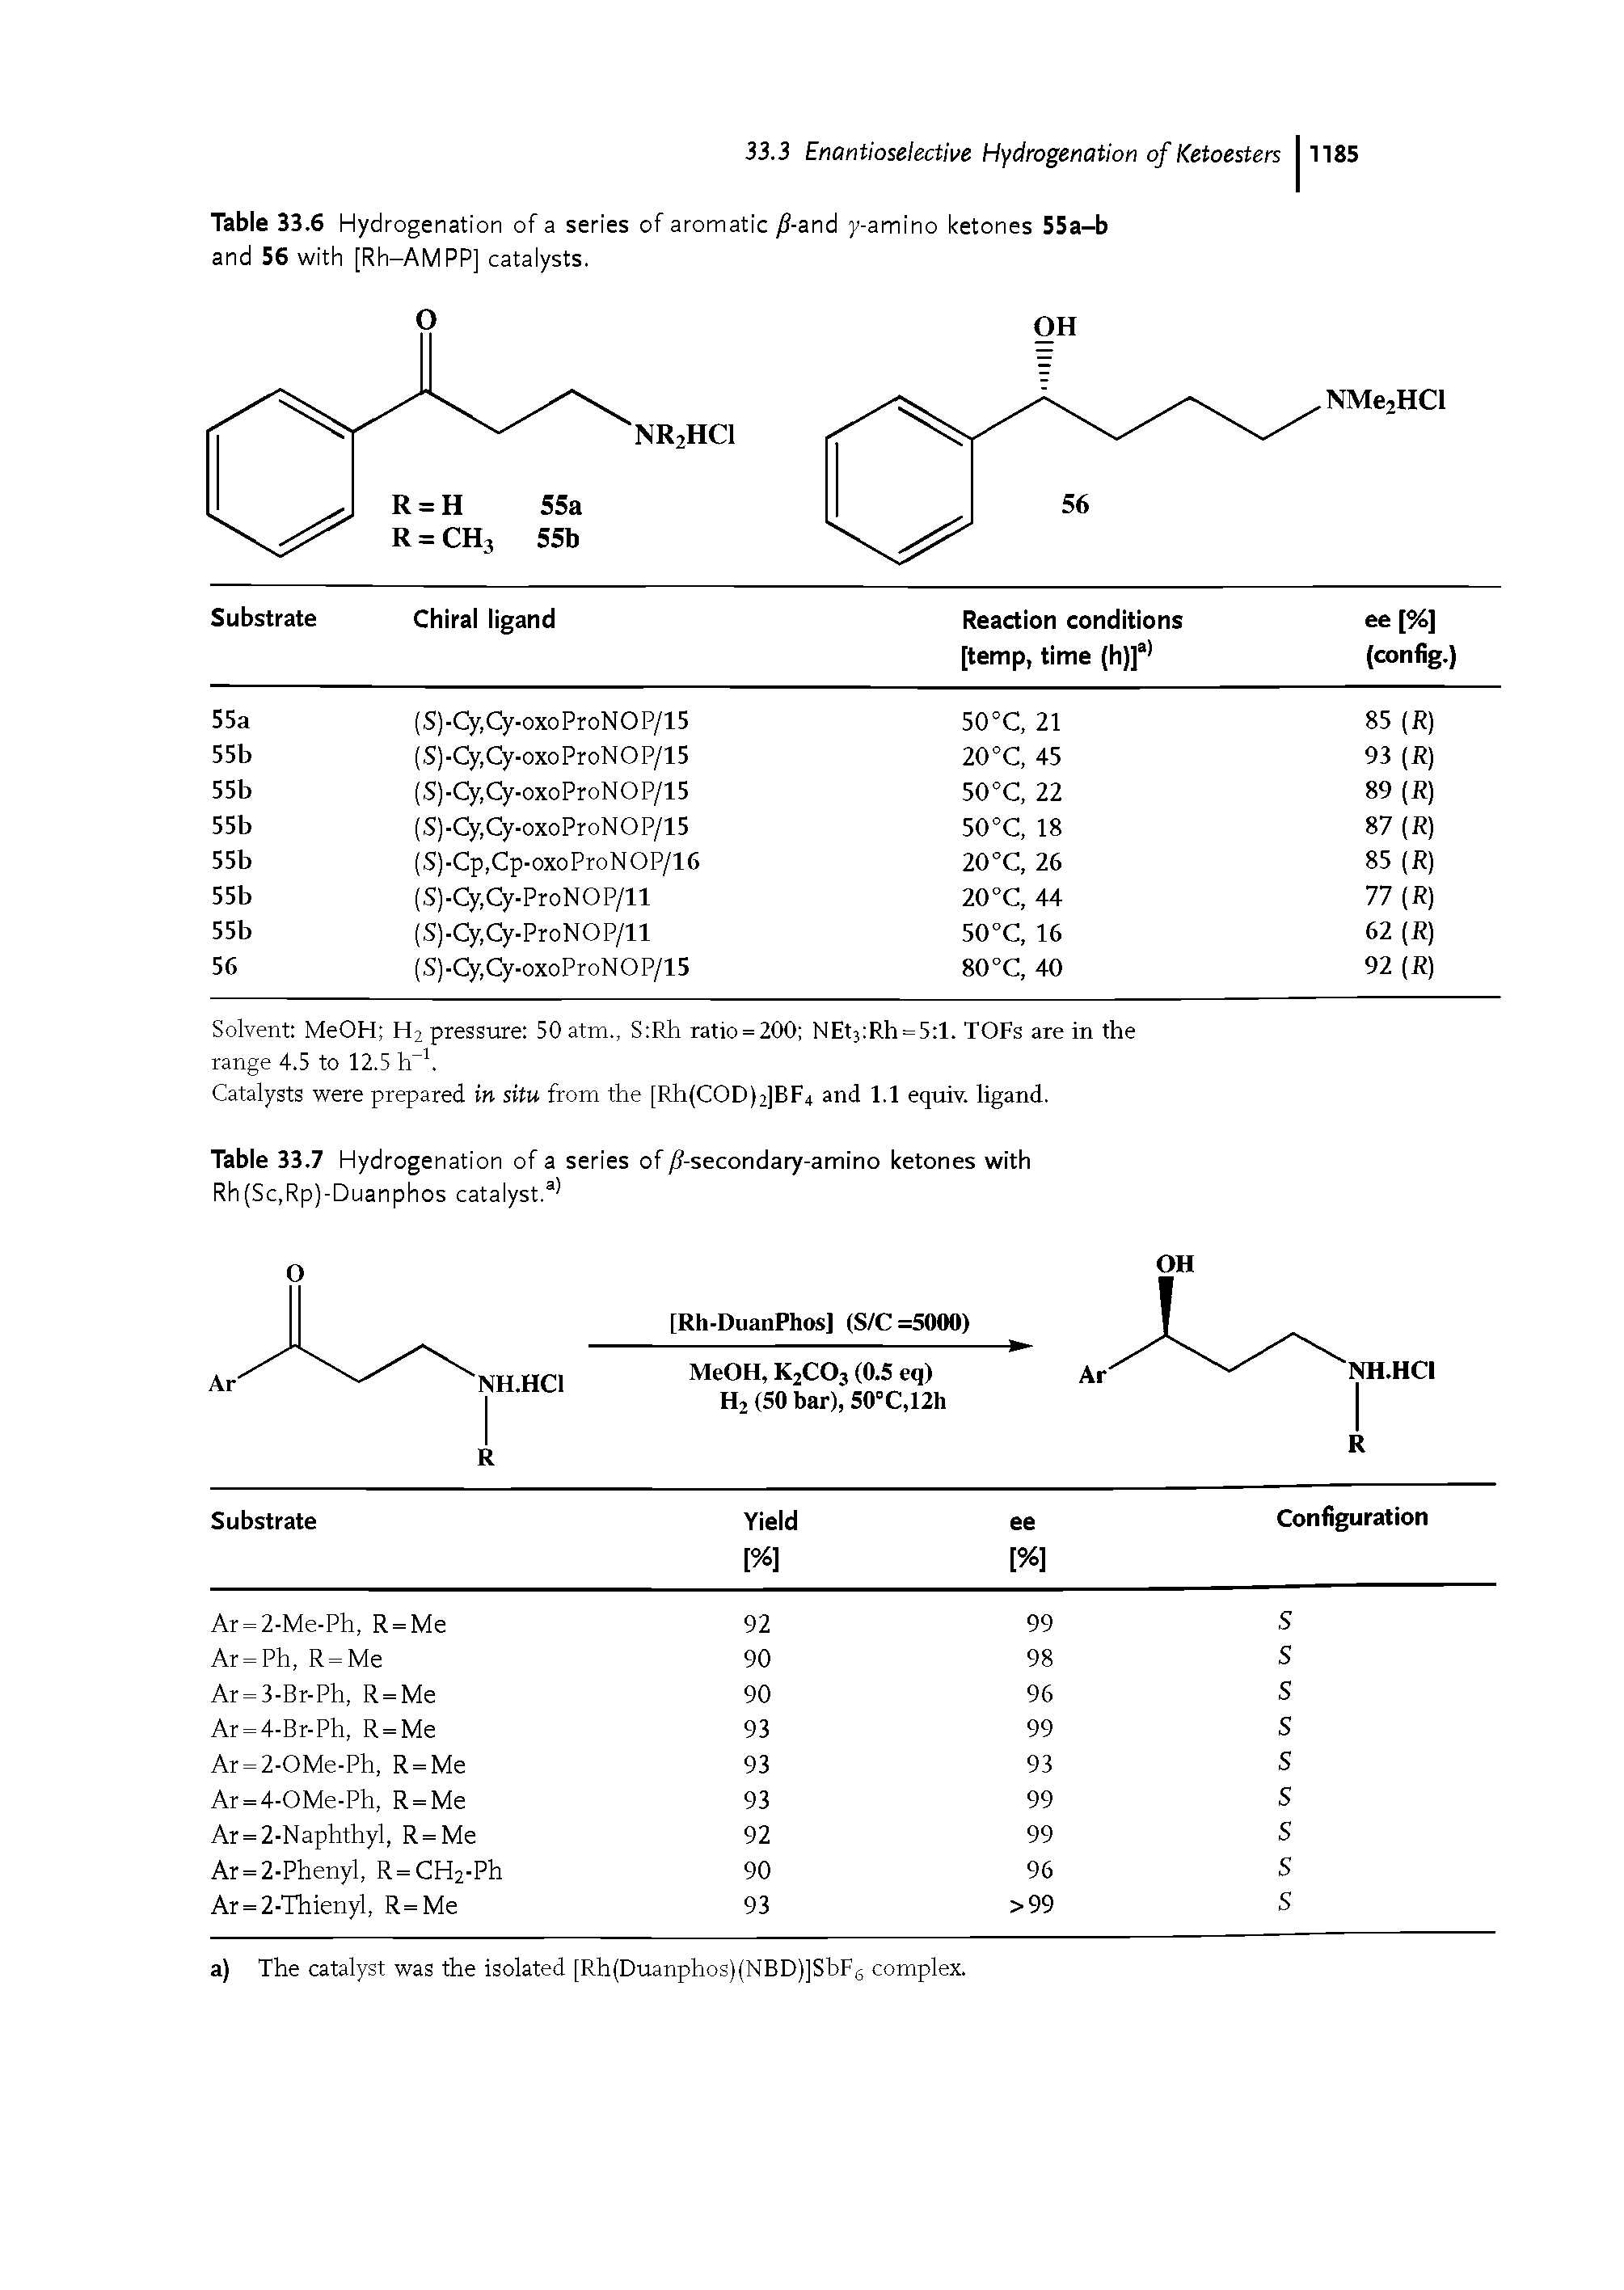 Table 33.6 Hydrogenation of a series of aromatic jS-and y-amino ketones 55a-b and 56 with [Rh-AMPP] catalysts.